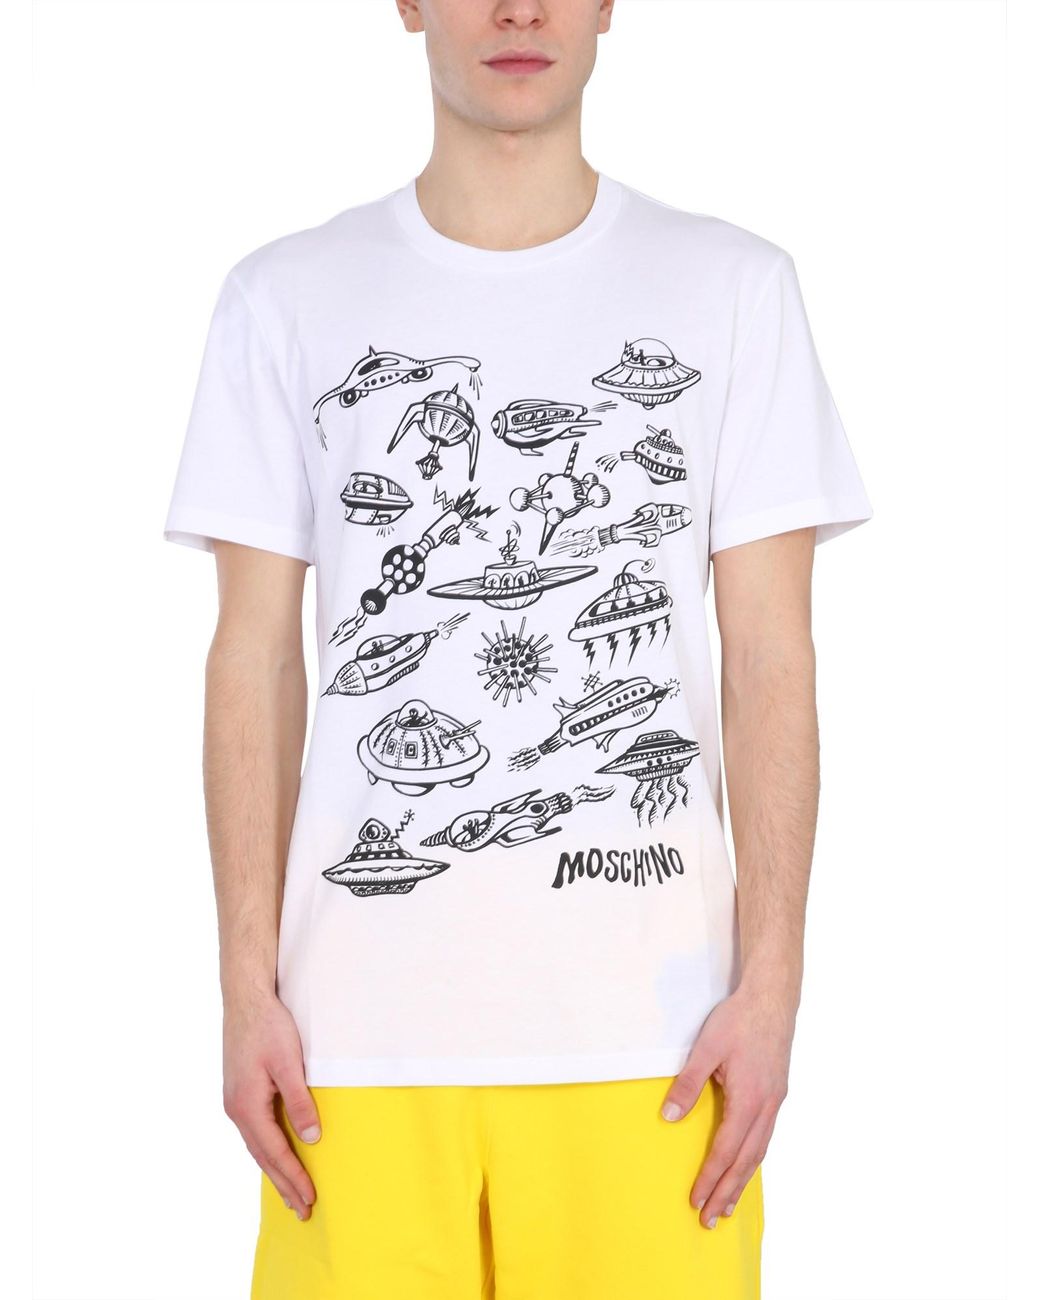 Moschino Cotton T-shirt With Spaceships Print in White for Men - Lyst